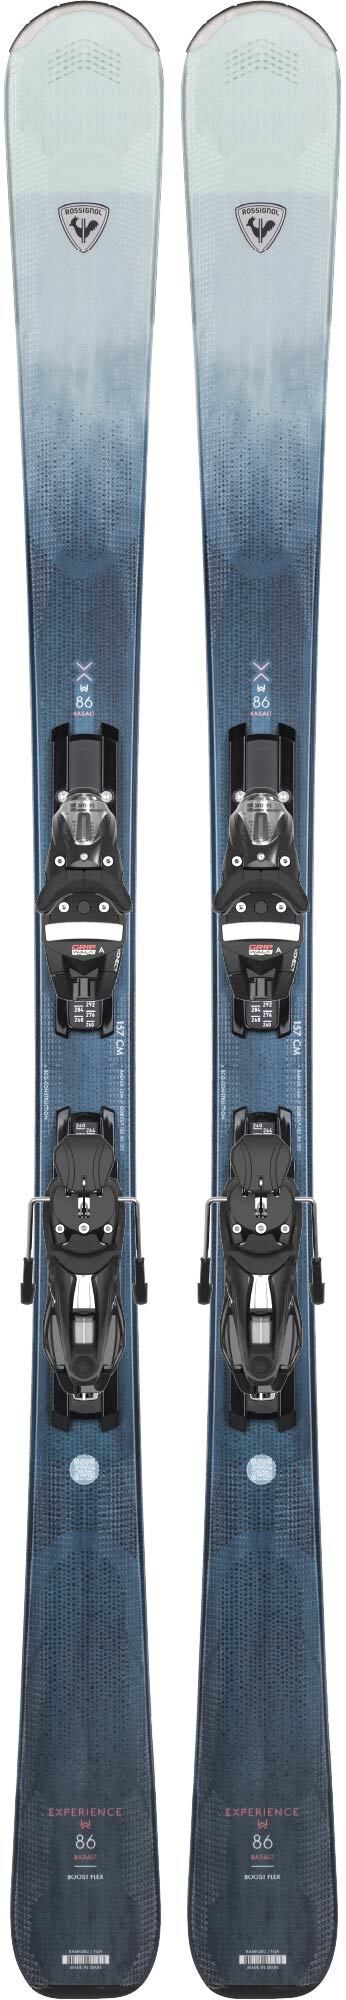 EXPERIENCE W 86 BSLT KONECT | ALL MOUNTAIN | Rossignol